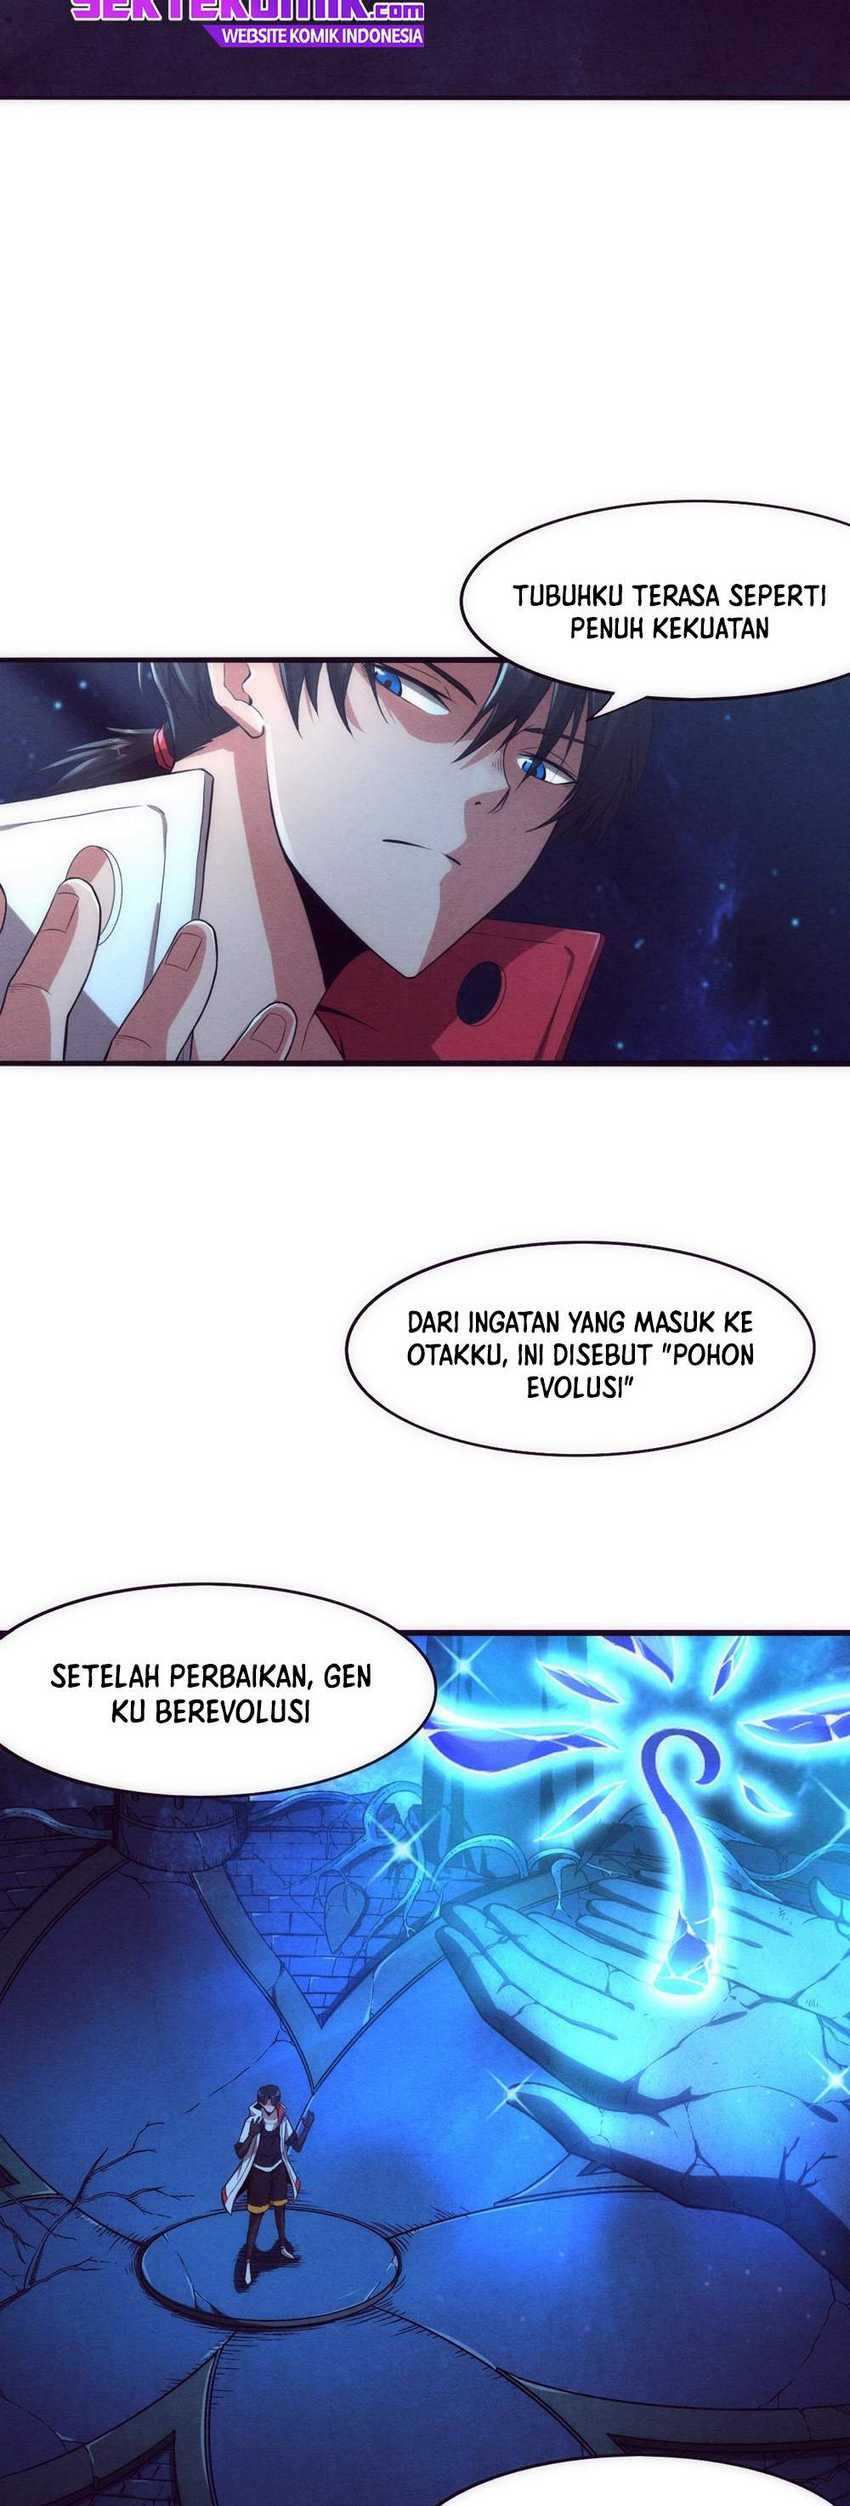 Evolution frenzy Chapter 02 bahasa indonesia